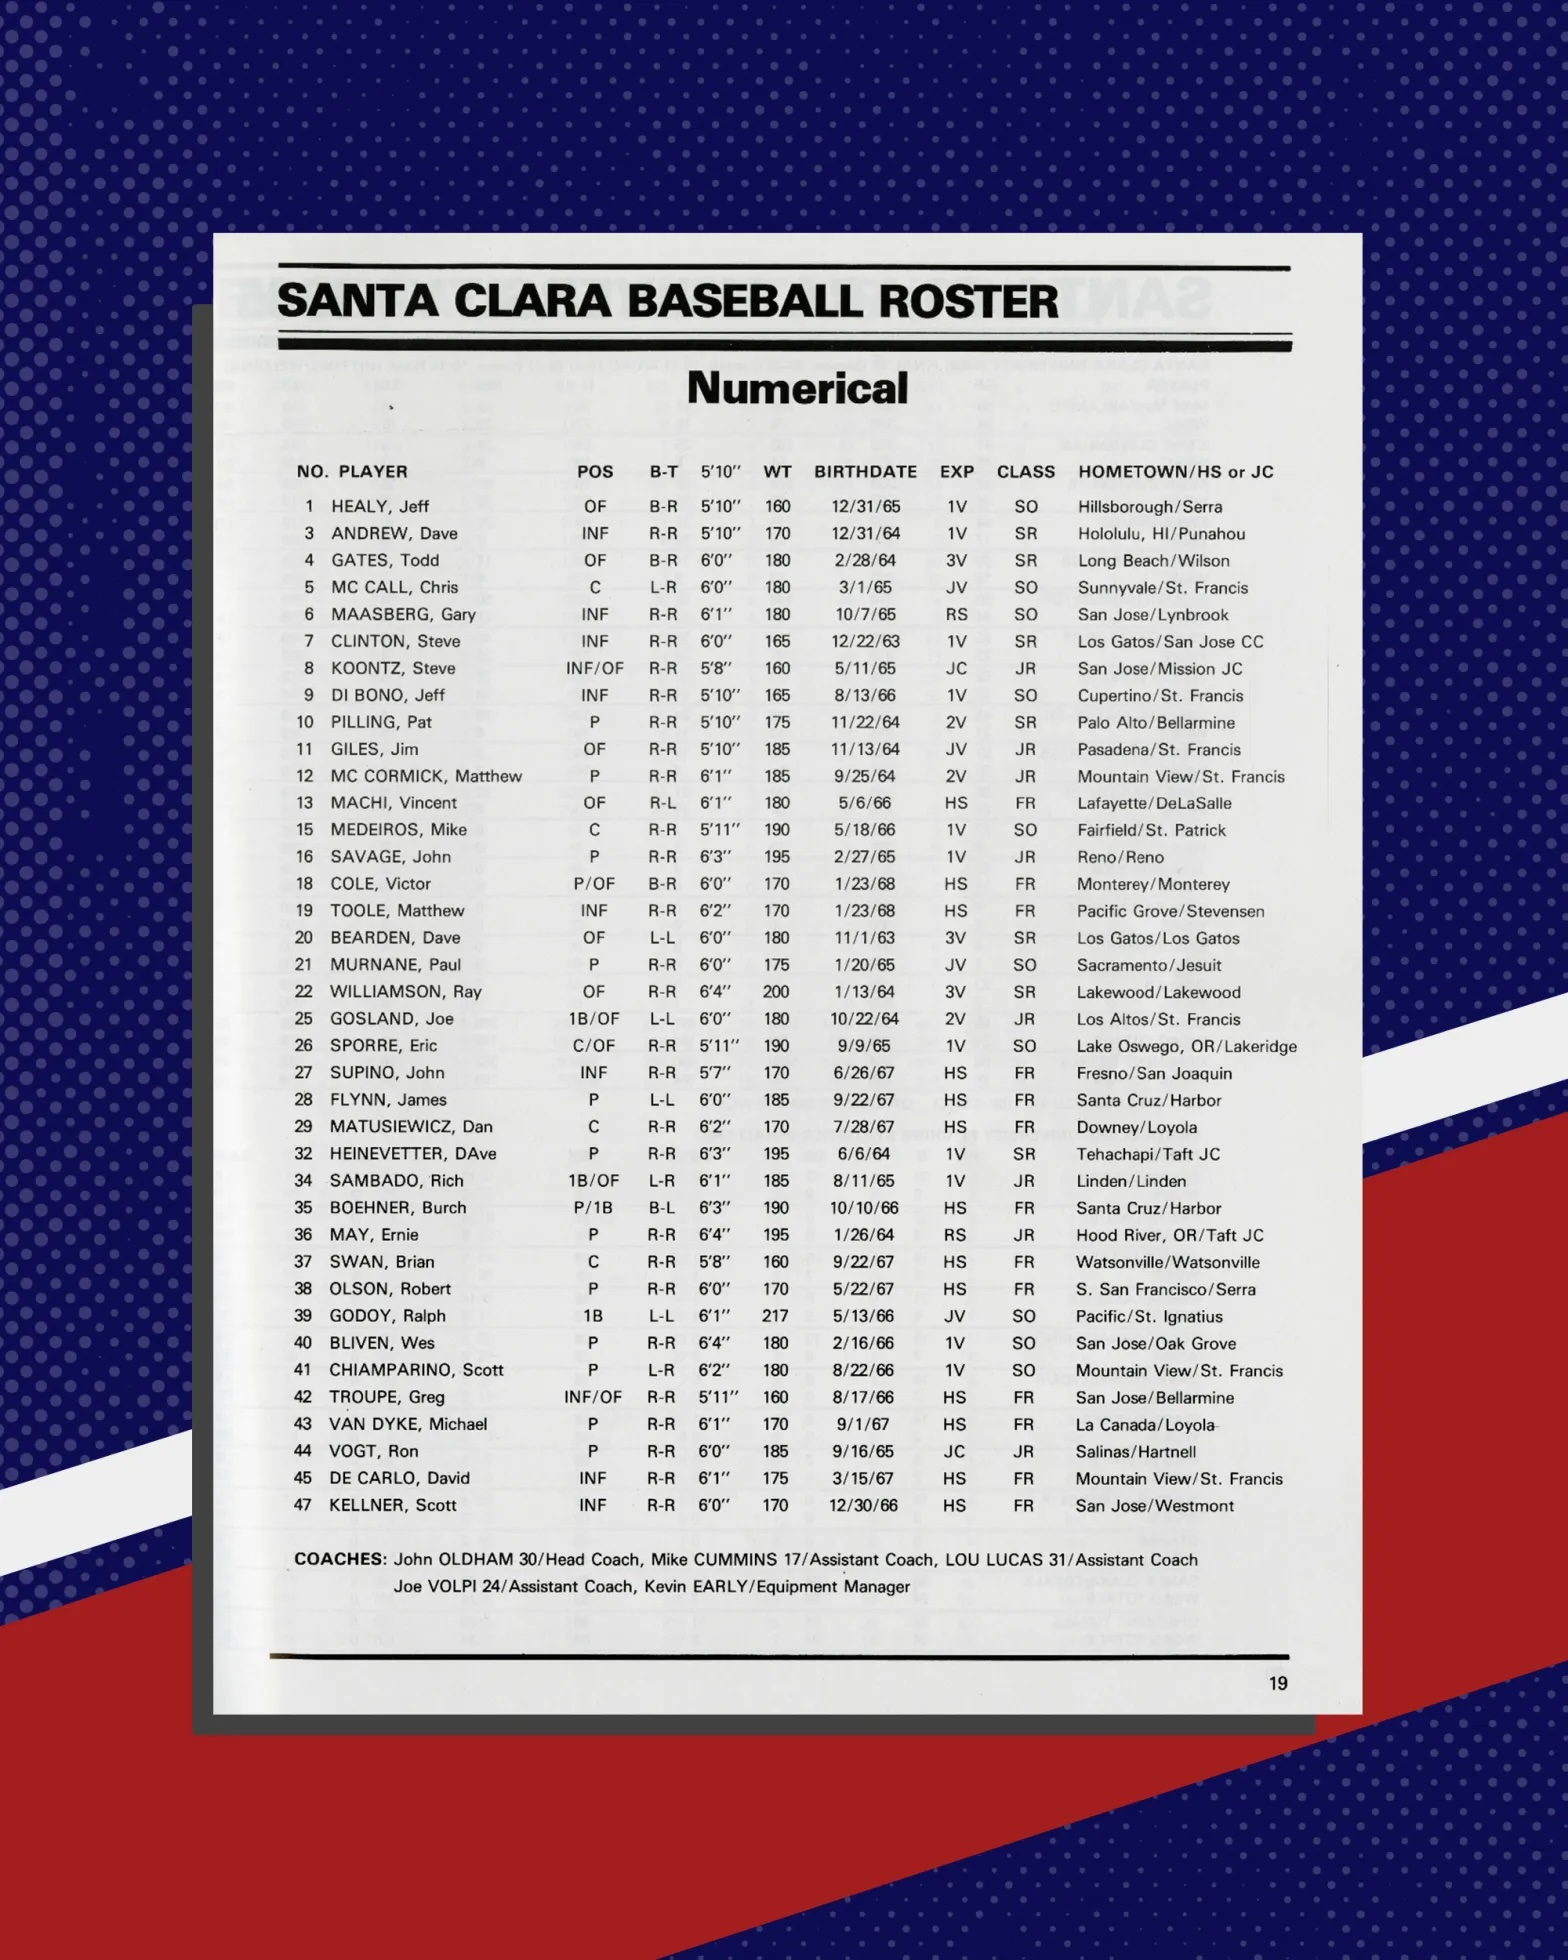 A team roster on an illustrated background.